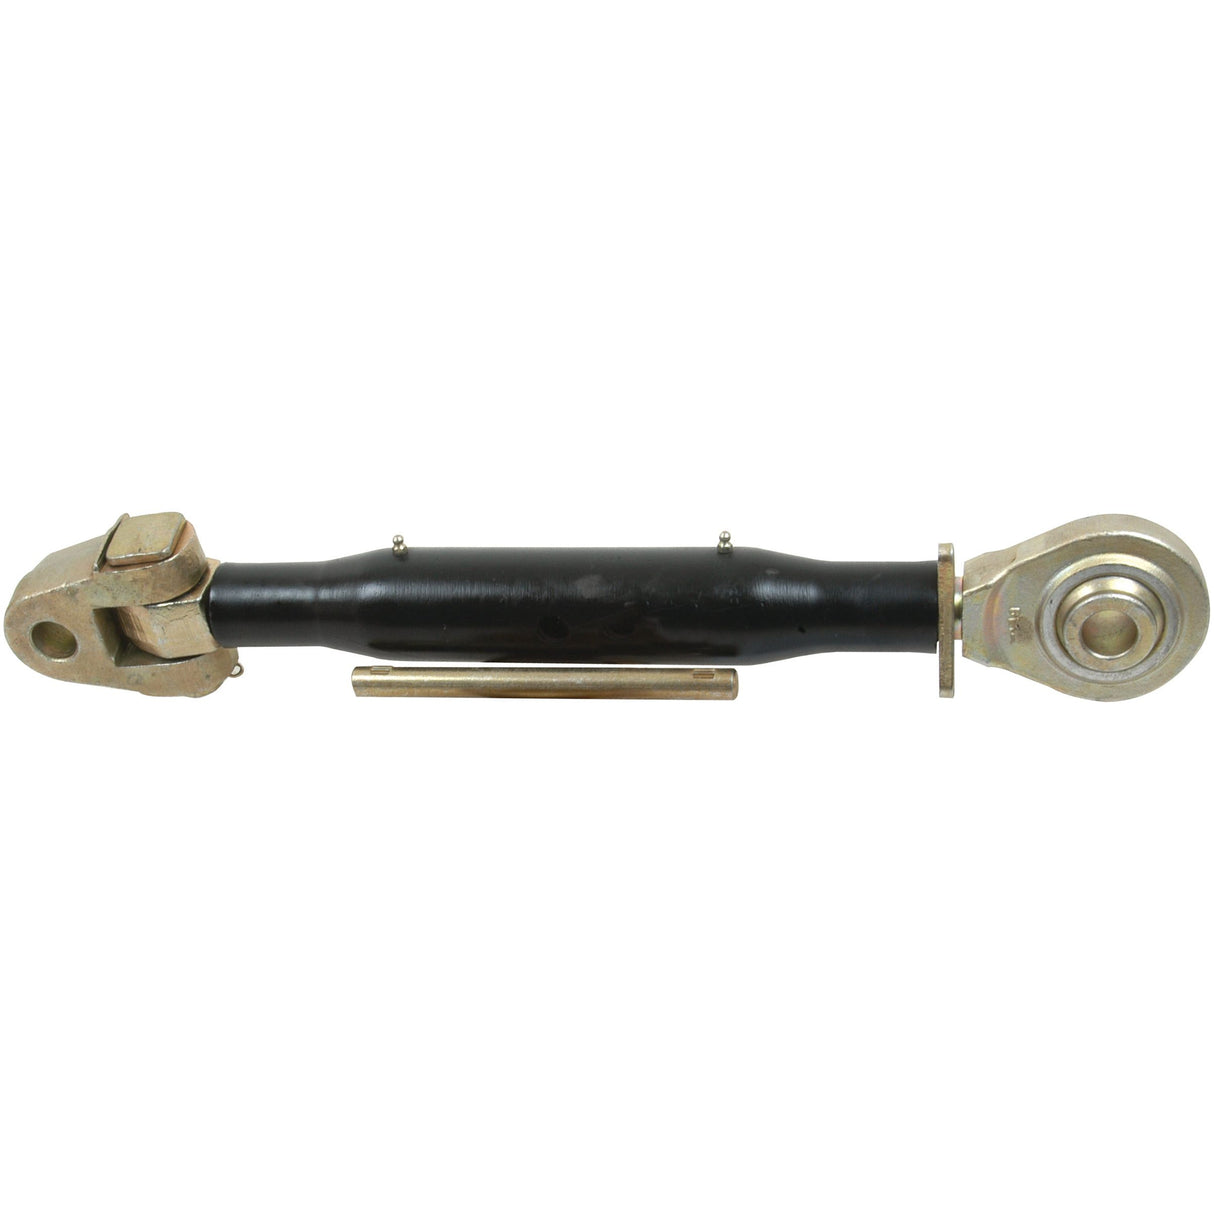 Top Link Heavy Duty (Cat.2/2) Knuckle and Ball,  M36 x 3.00, Min. Length: 575mm.
 - S.99505 - Farming Parts